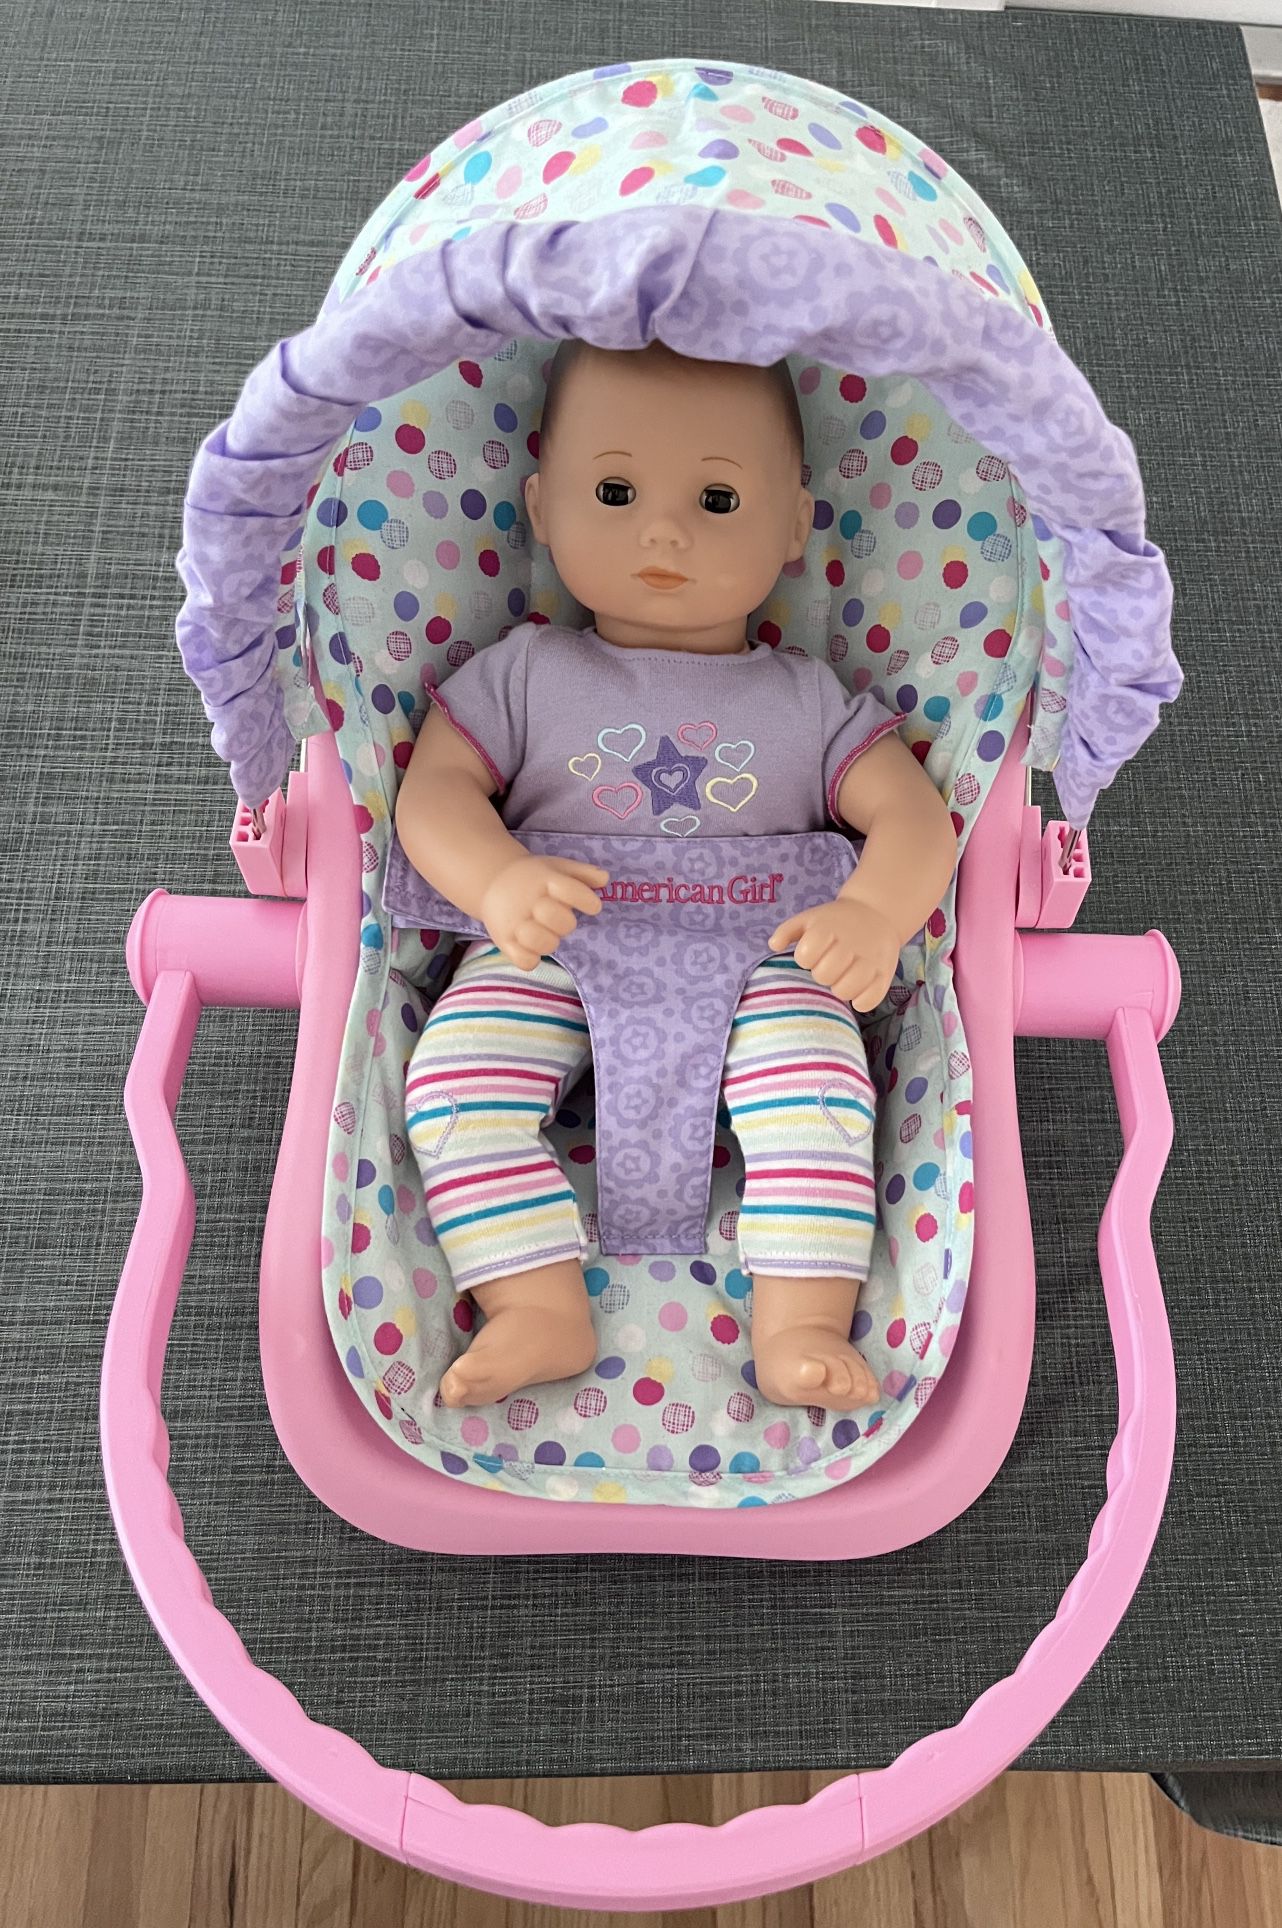 American Girl Bitty Baby Doll And Accessories 